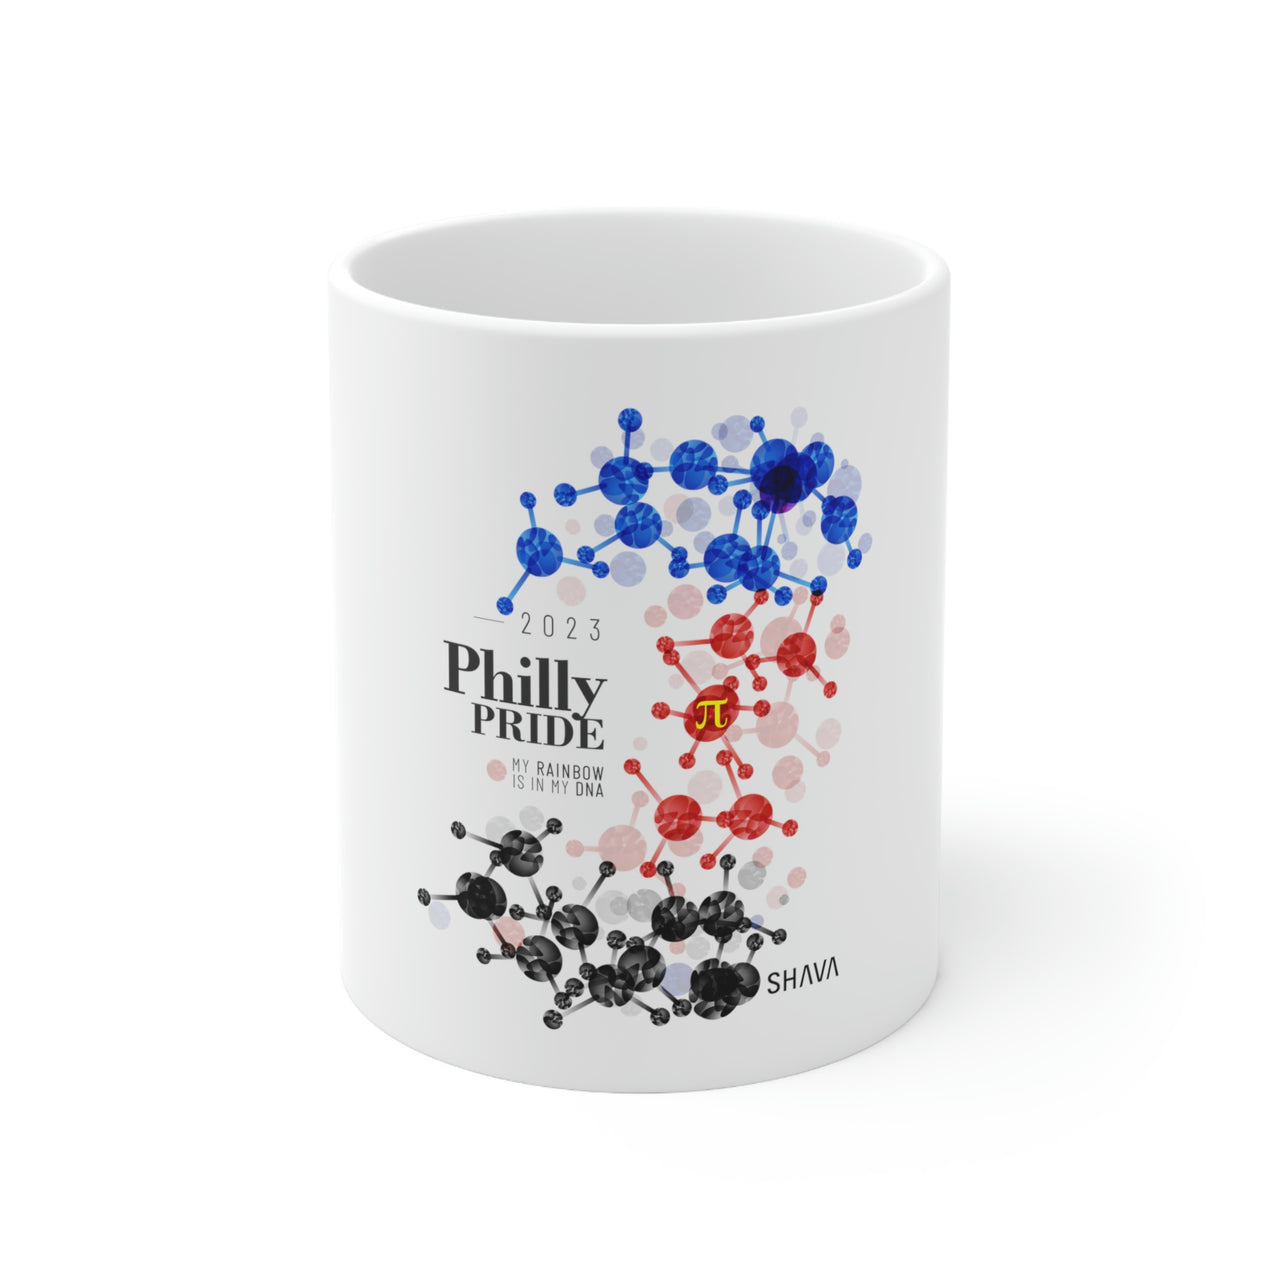 Polyamory Philly Pride Ceramic Mug - Rainbow Is In My DNA SHAVA CO